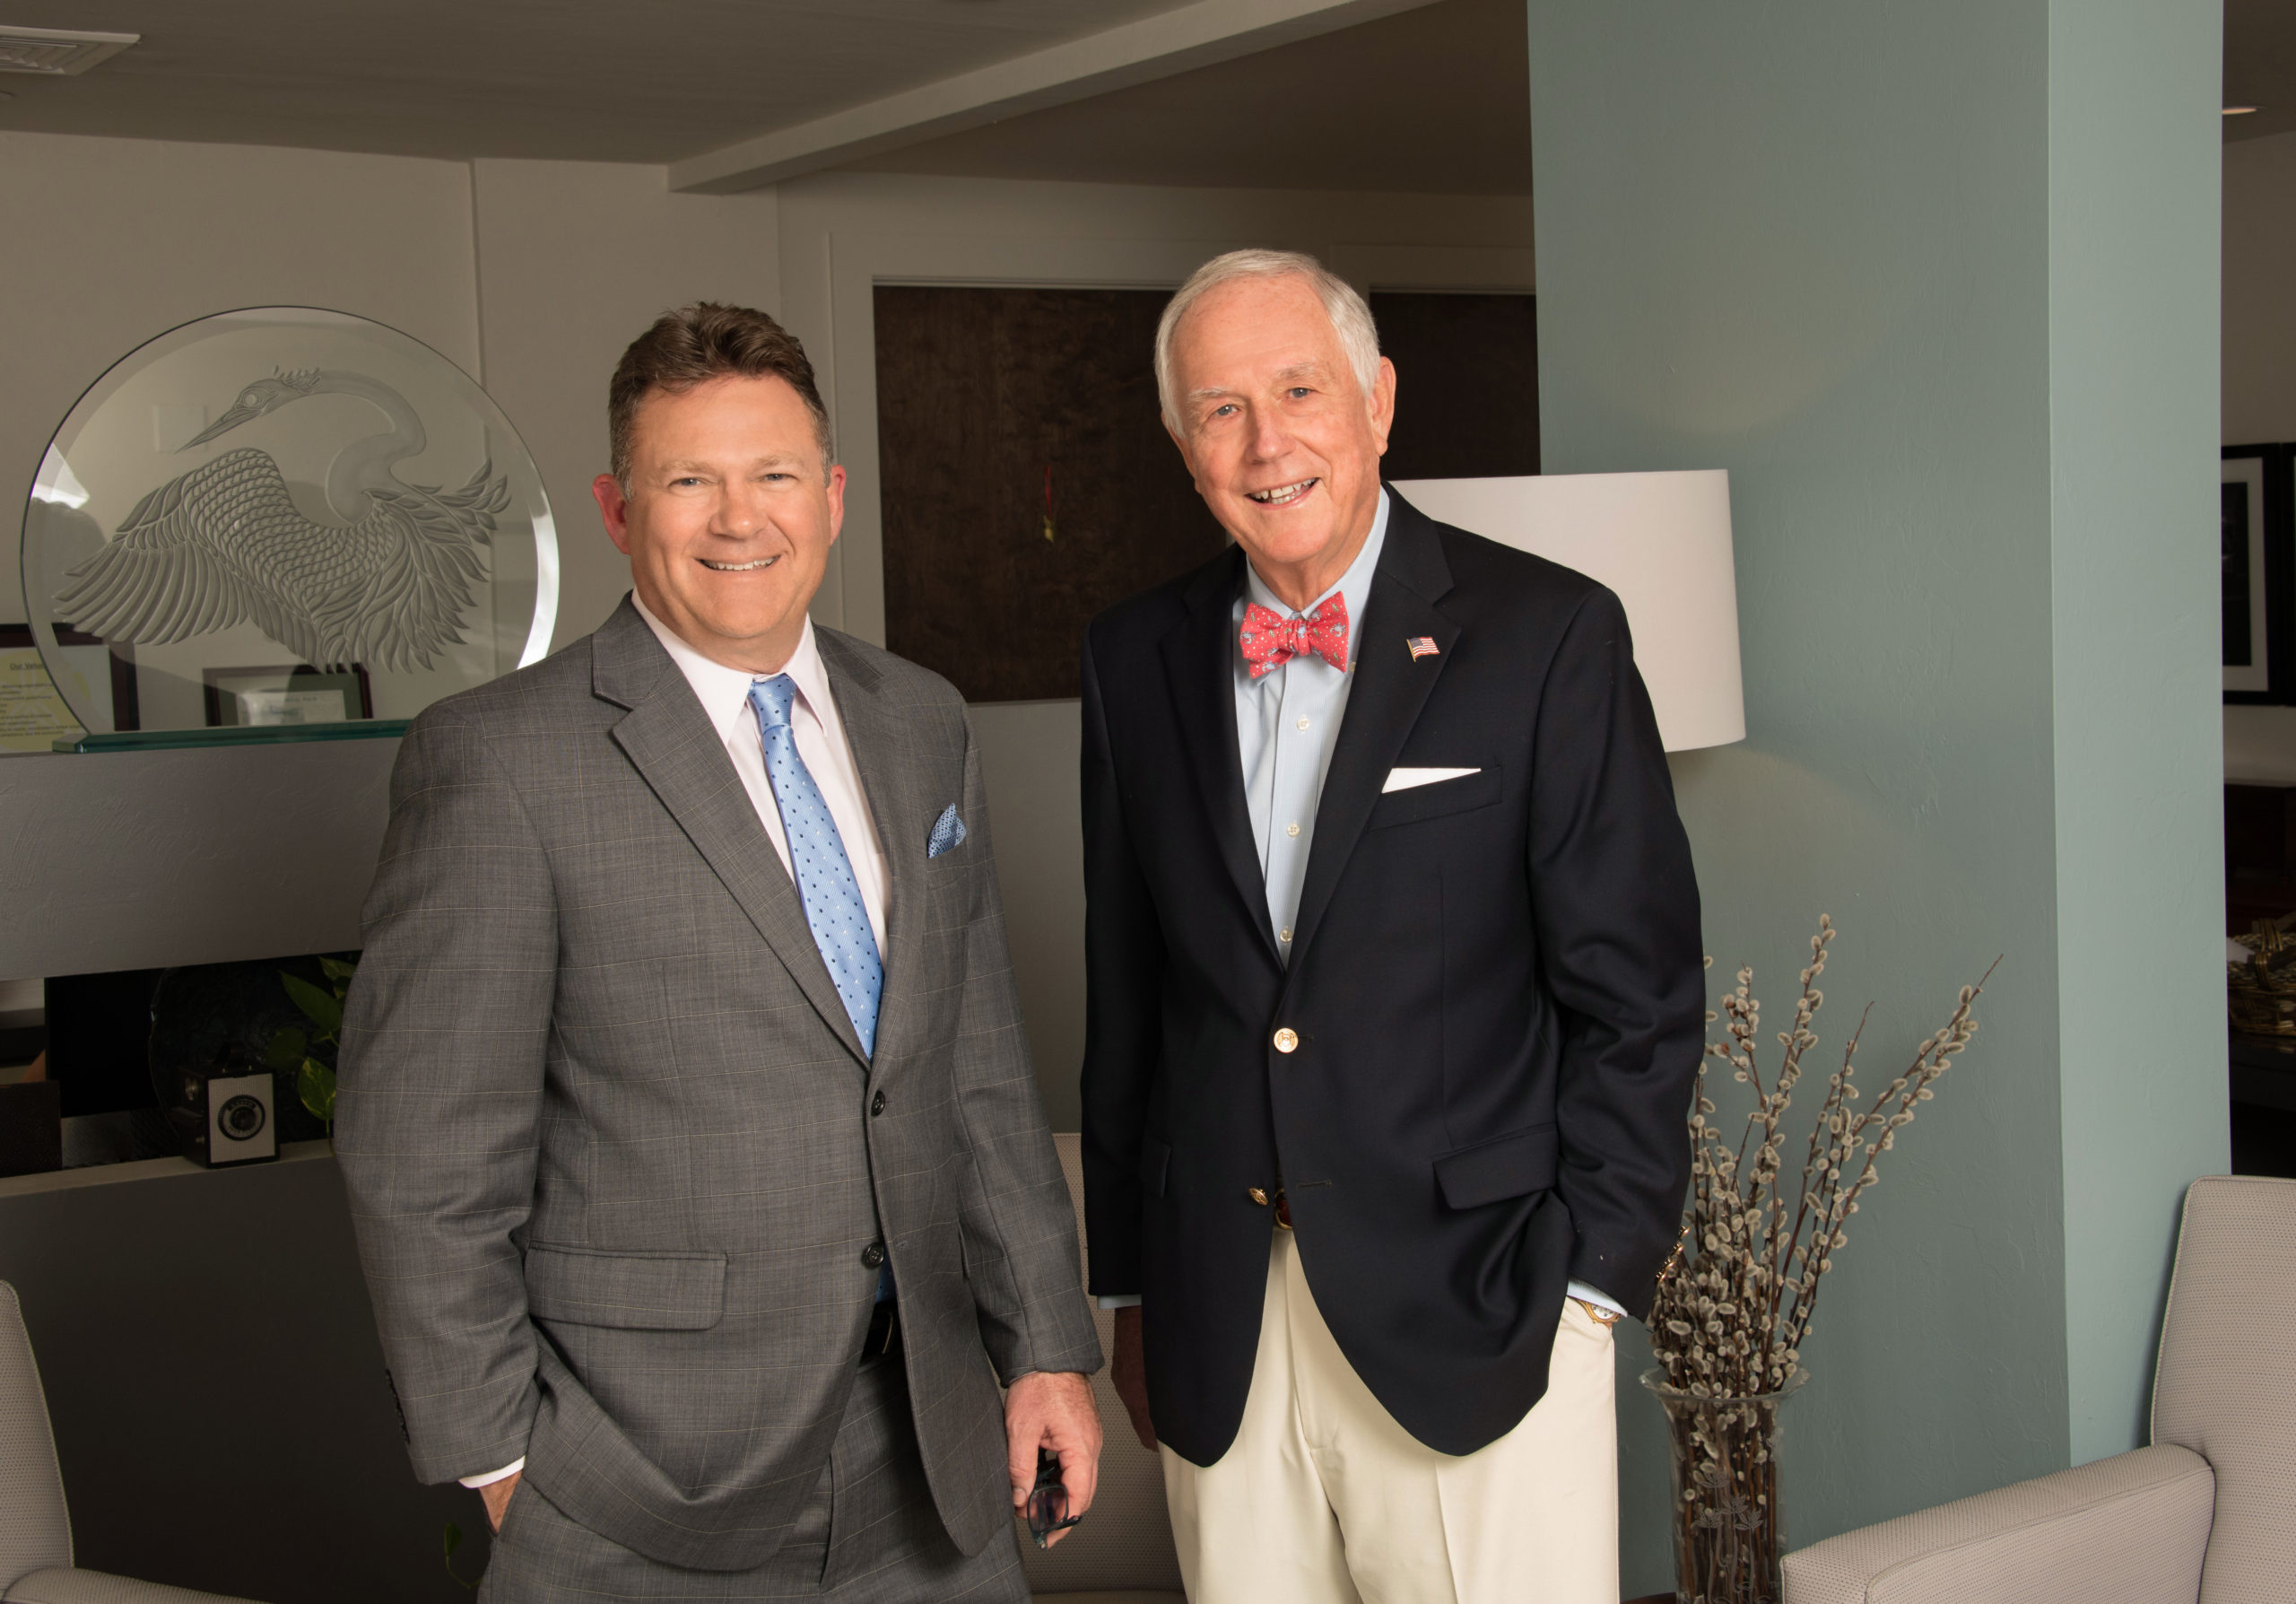 Terence M. Igo, CEO and S. Albert D. Hanser, Founder and Chairman at the Sanibel Captiva Trust Company